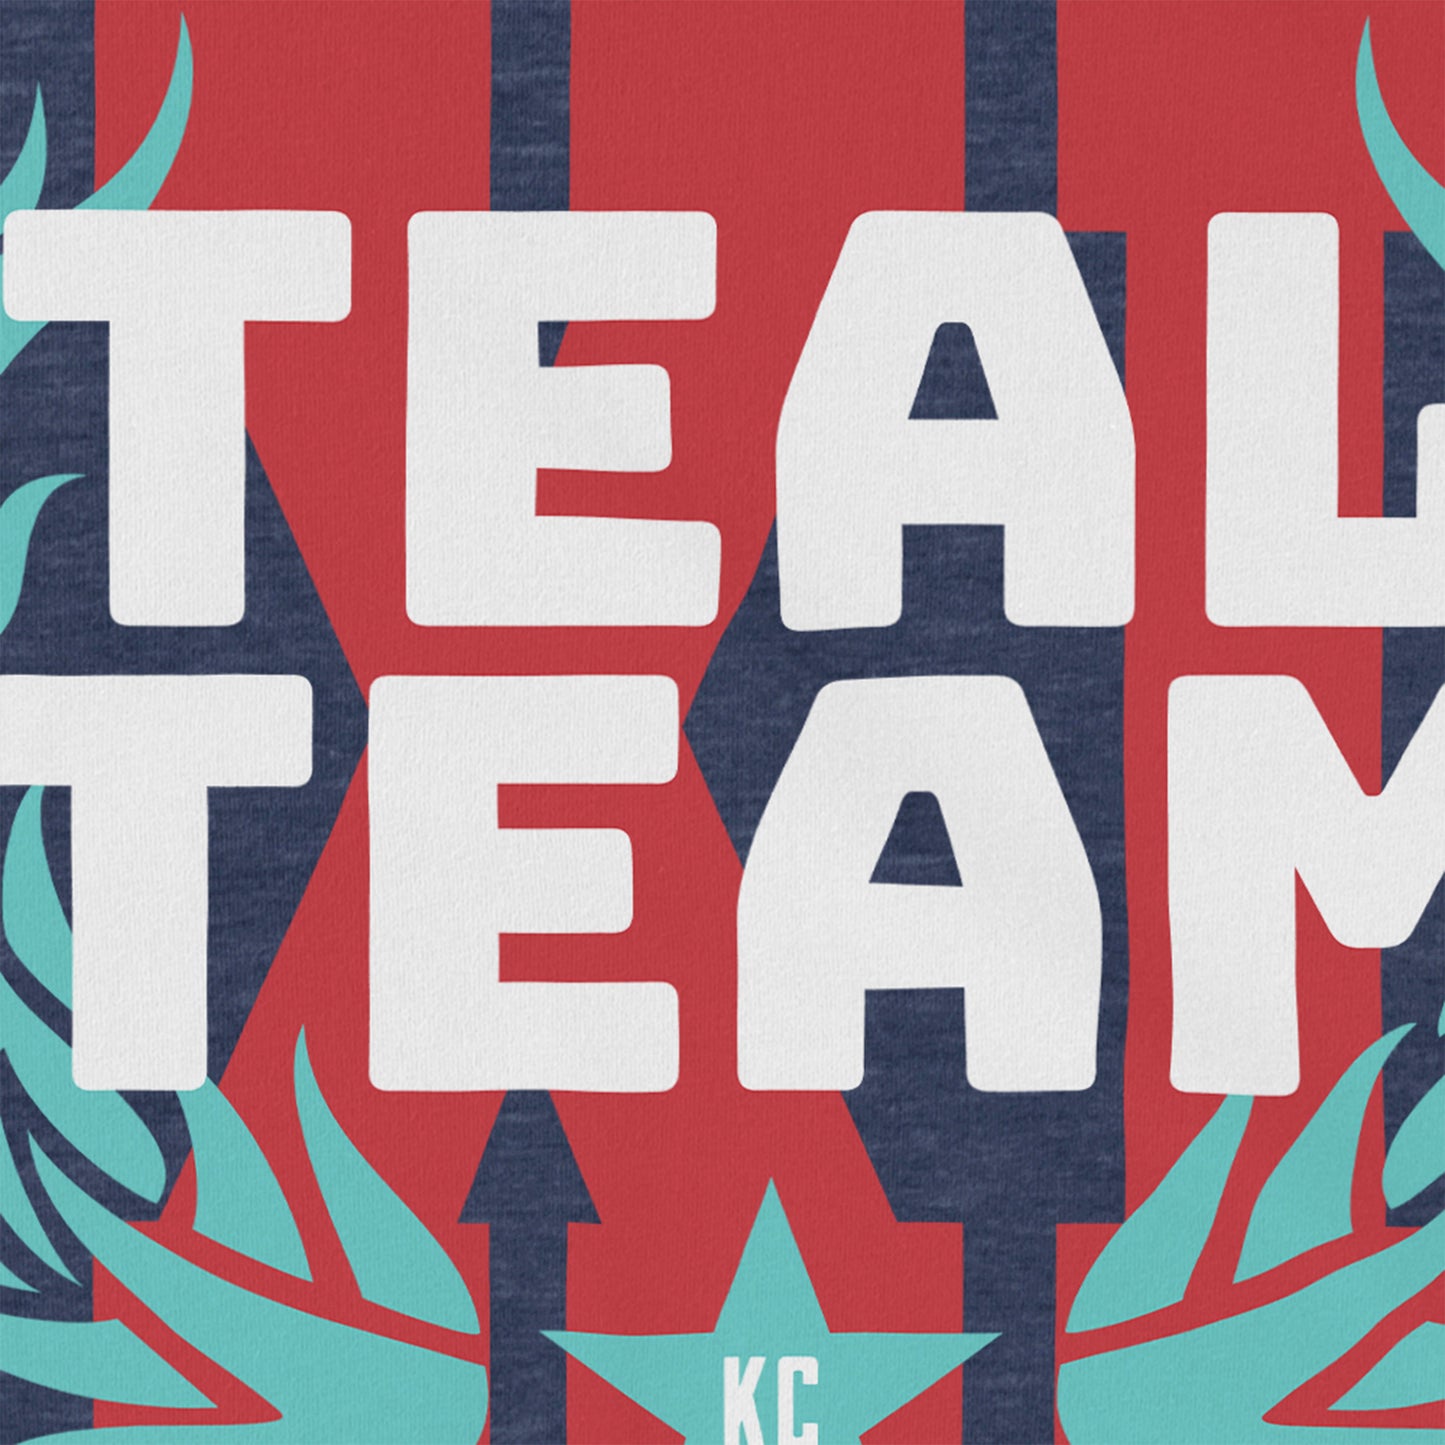 KC Swag Kansas City Current TEAL TEAM X! on heather navy unisex t-shirt closeup details of prinyted graphics